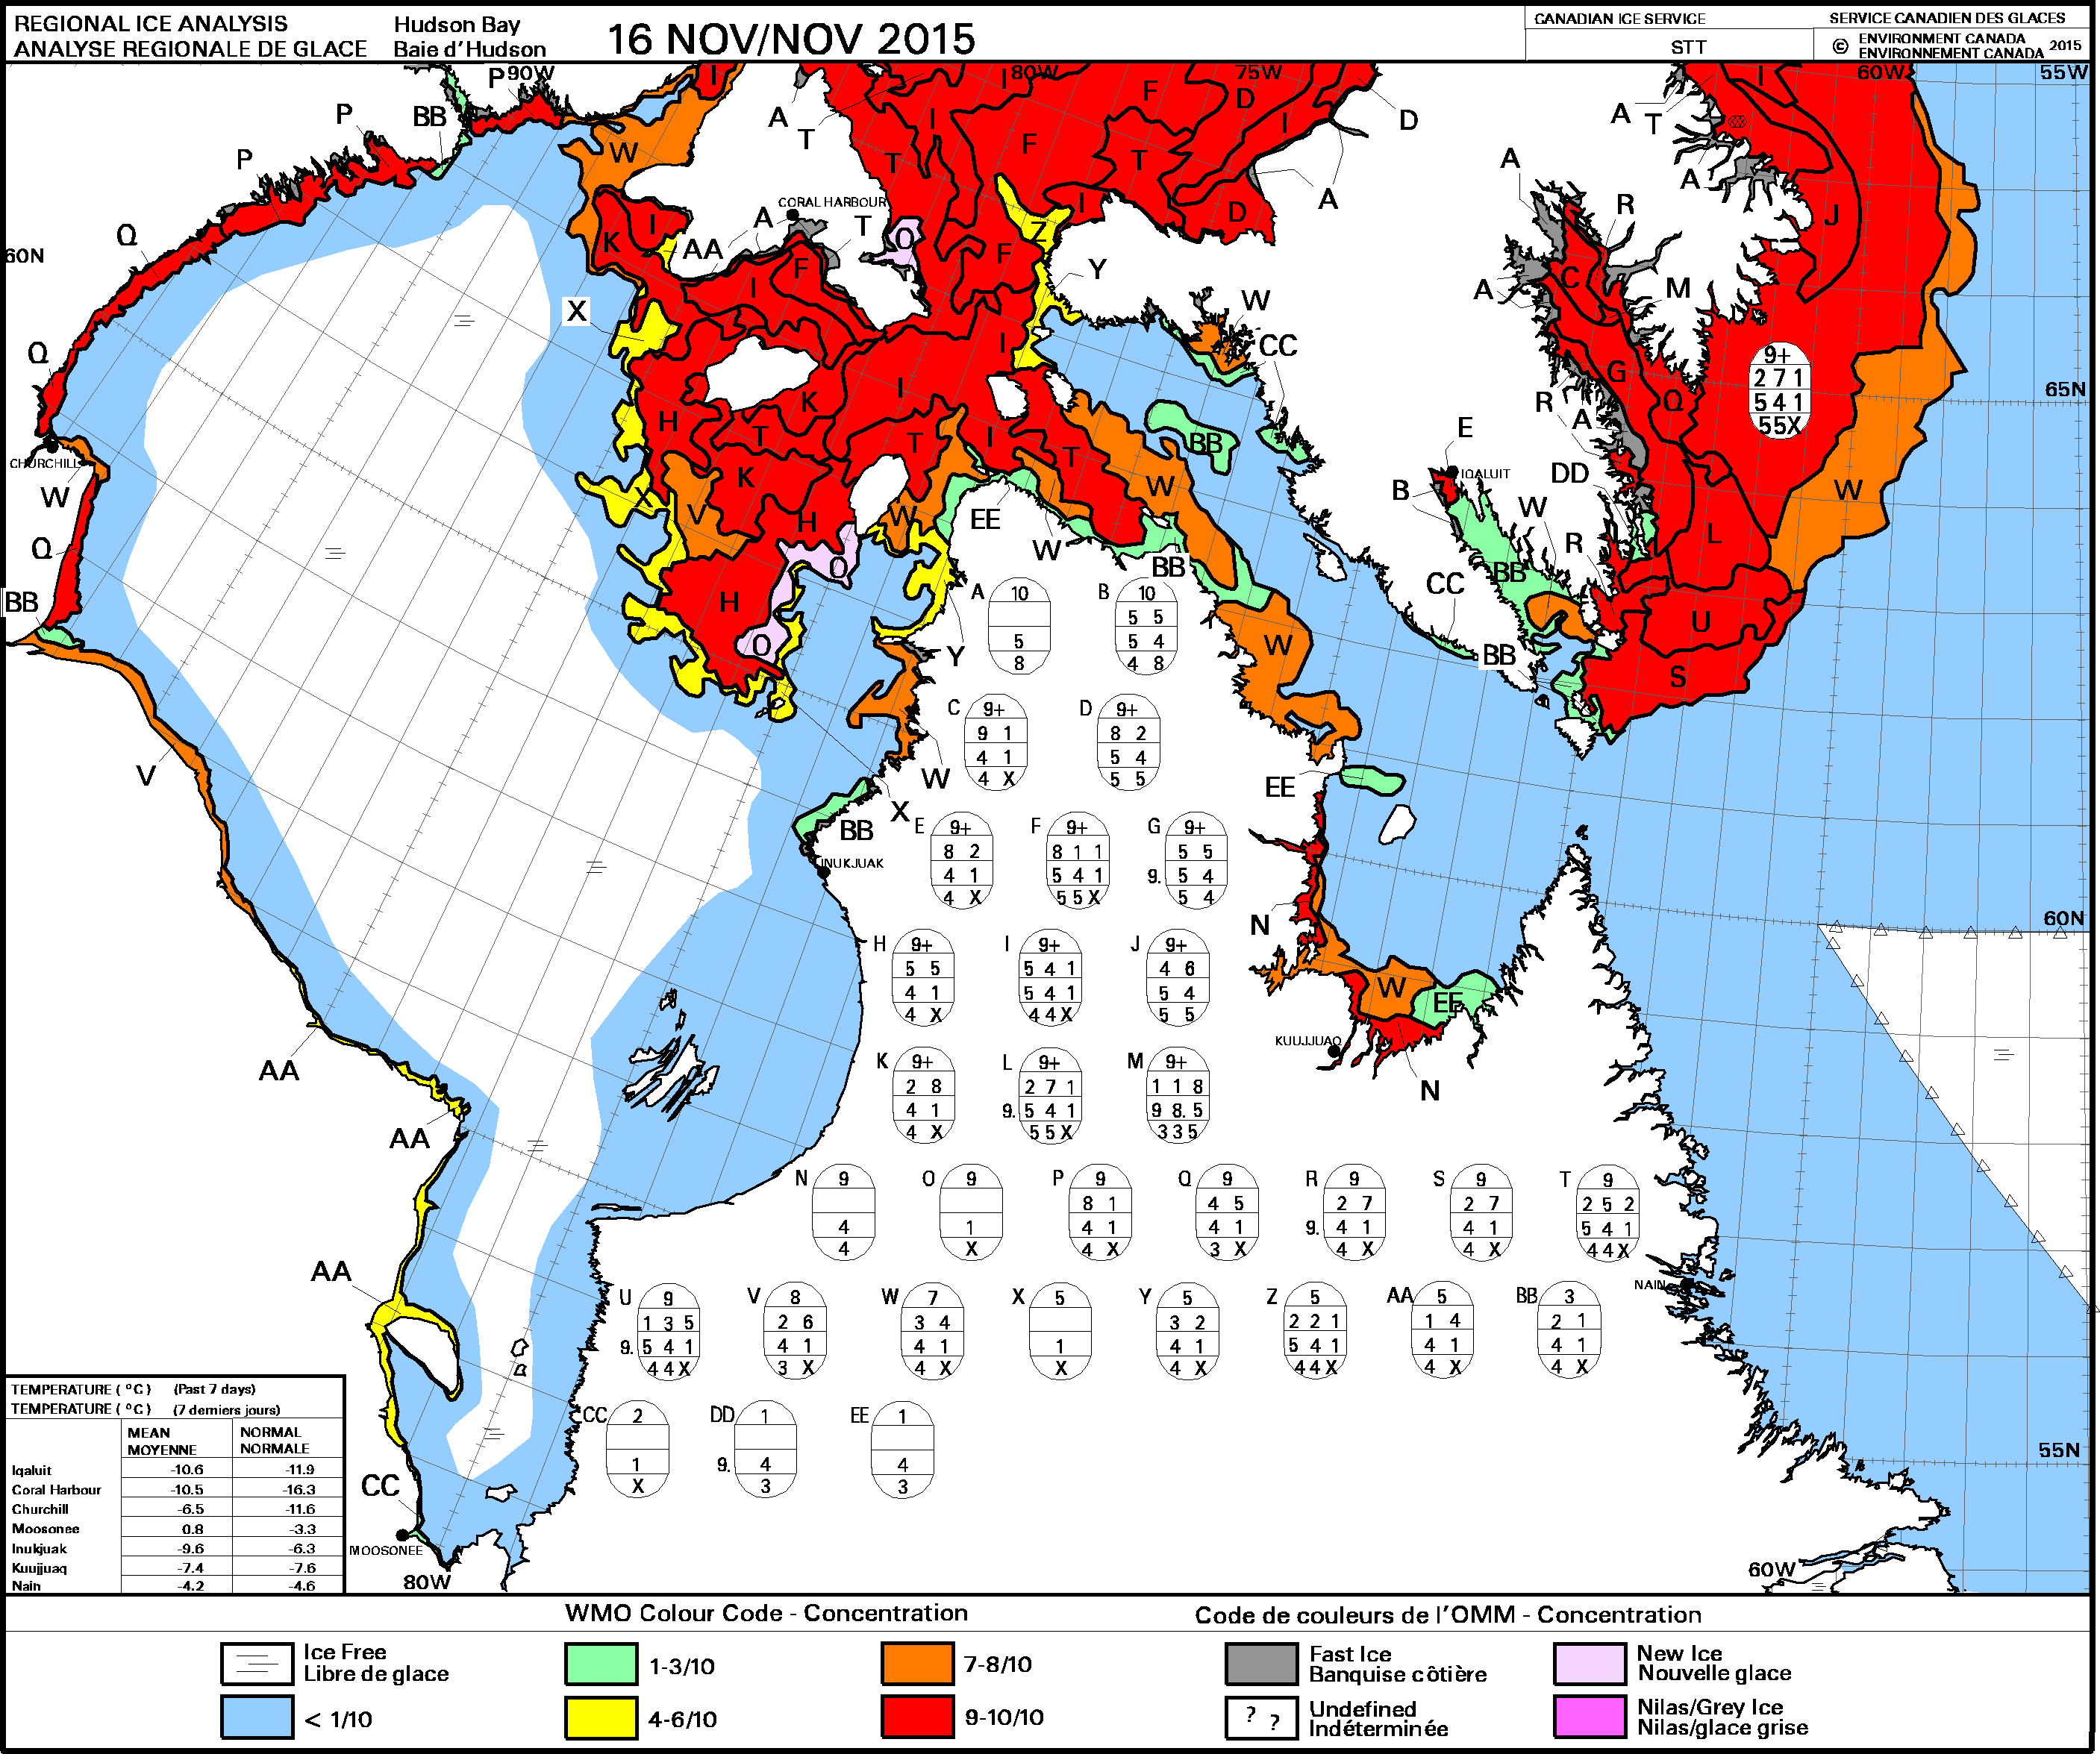 Hudson Bay ice concentration on 16 and 23 November 2015 [click to enlarge]